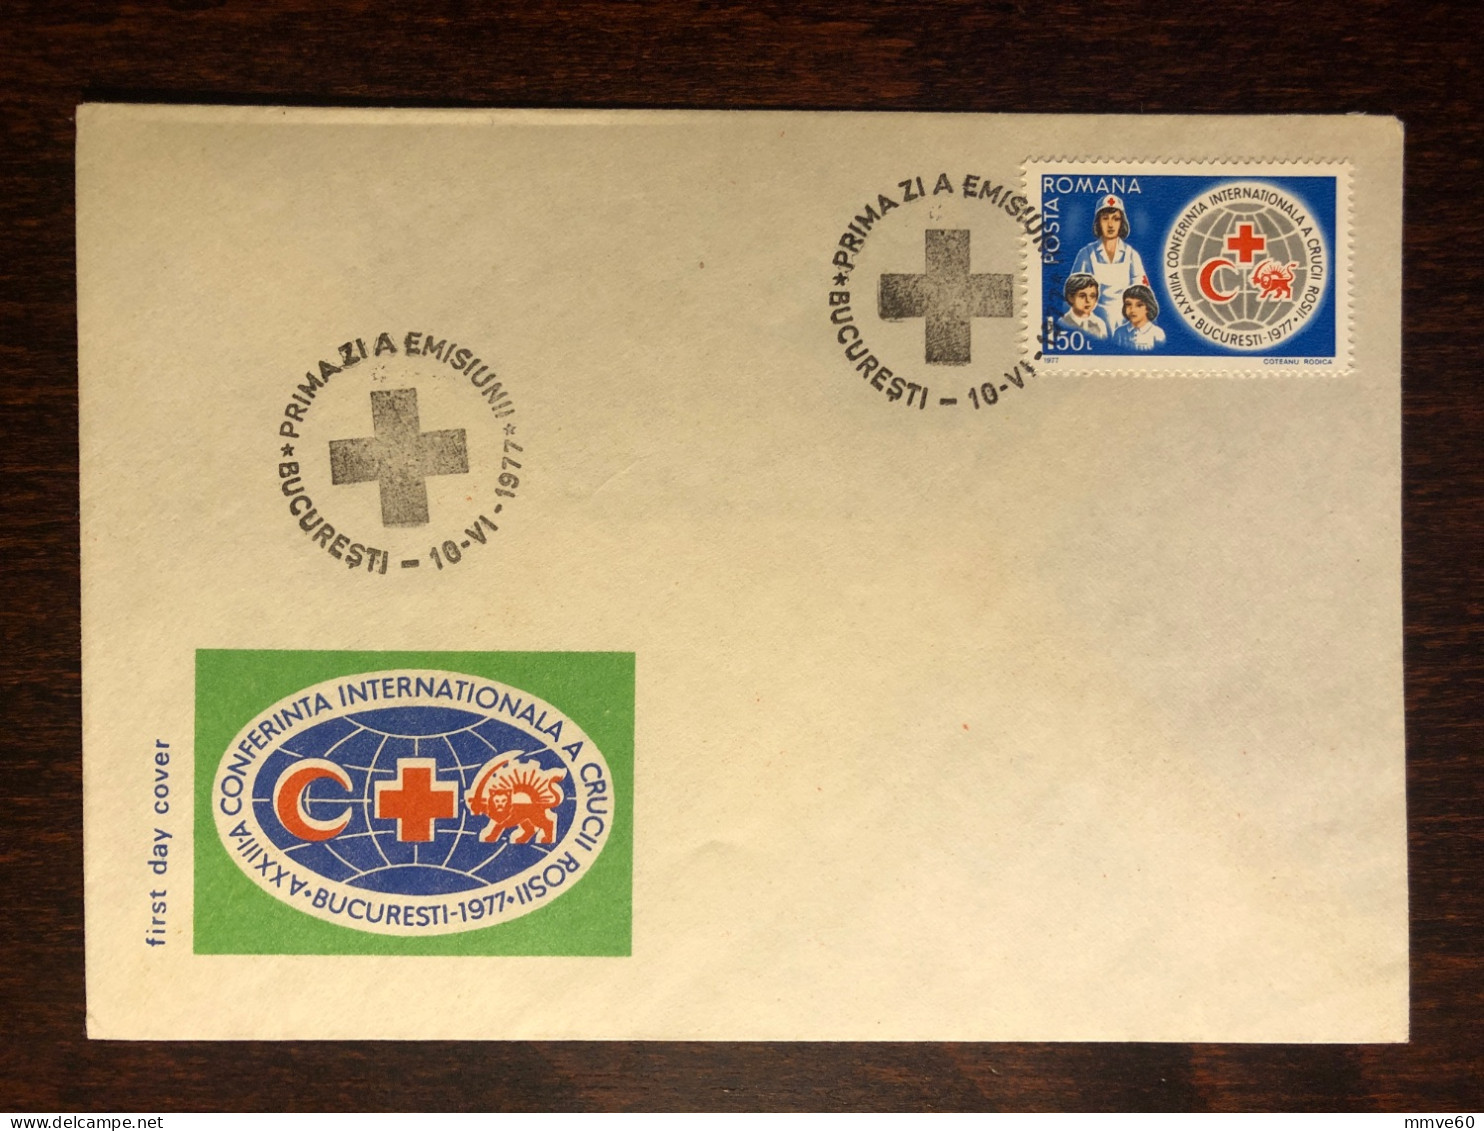 ROMANIA FDC COVER 1977 YEAR RED CROSS HEALTH MEDICINE STAMPS - FDC